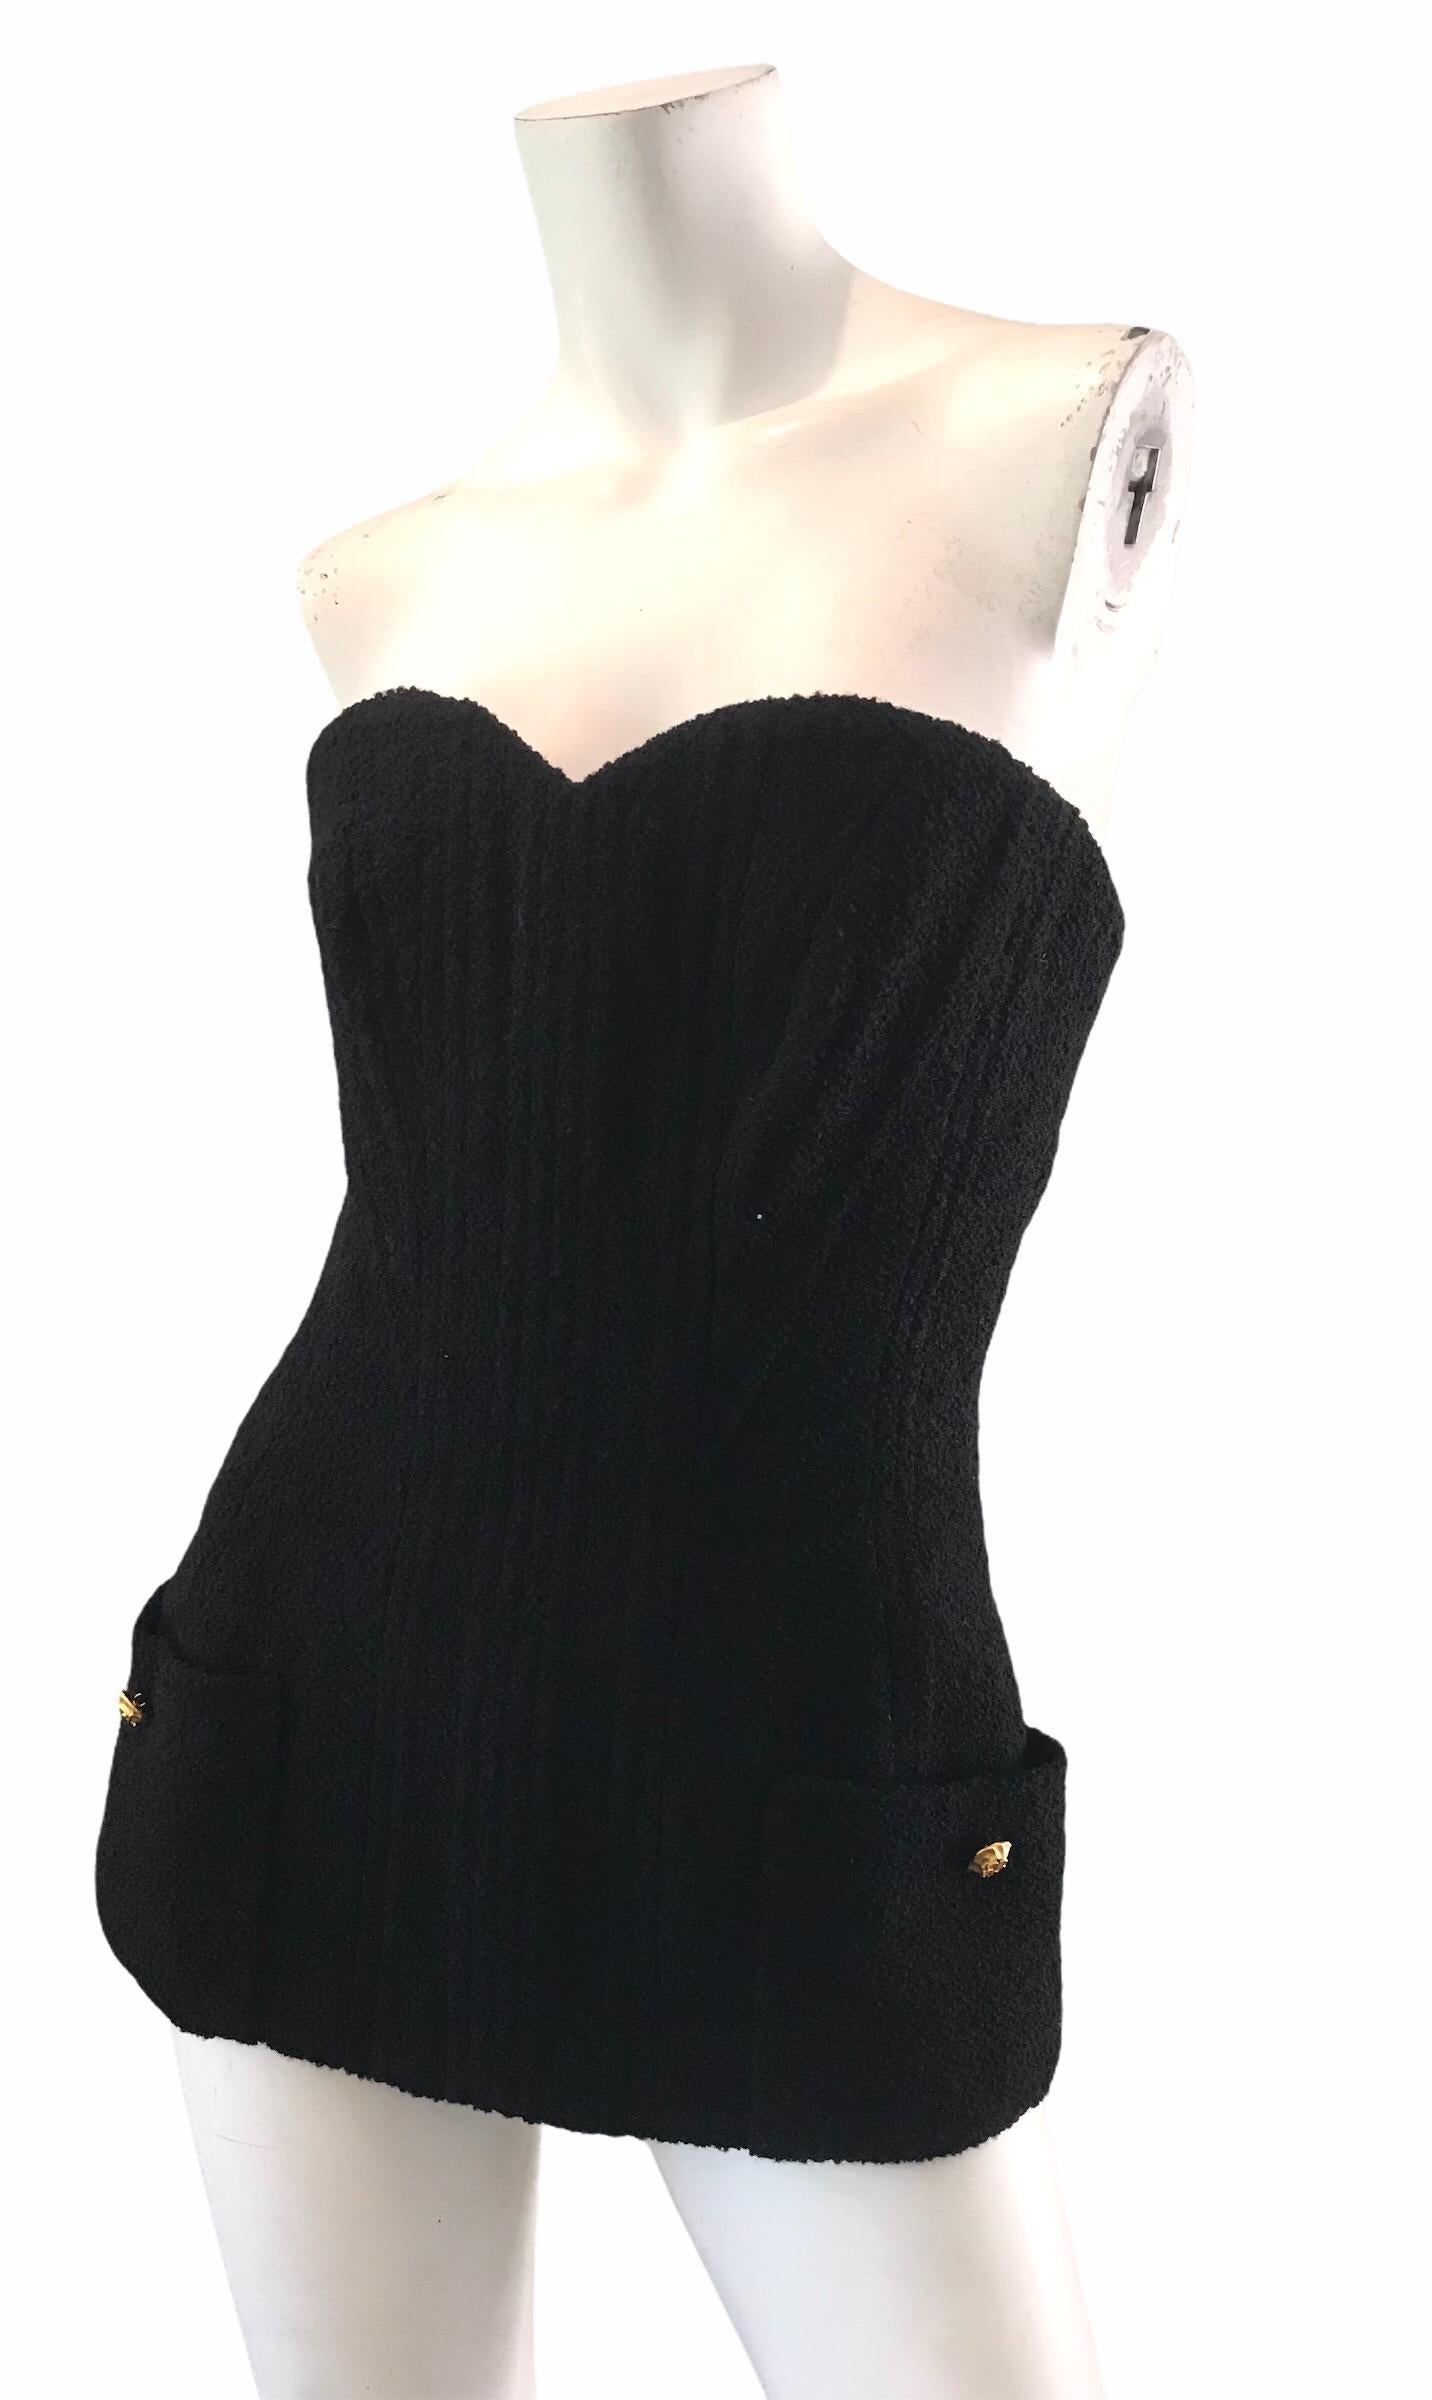 1993 Chanel black boucle bustier with pockets. Condition: Excellent. Size M 